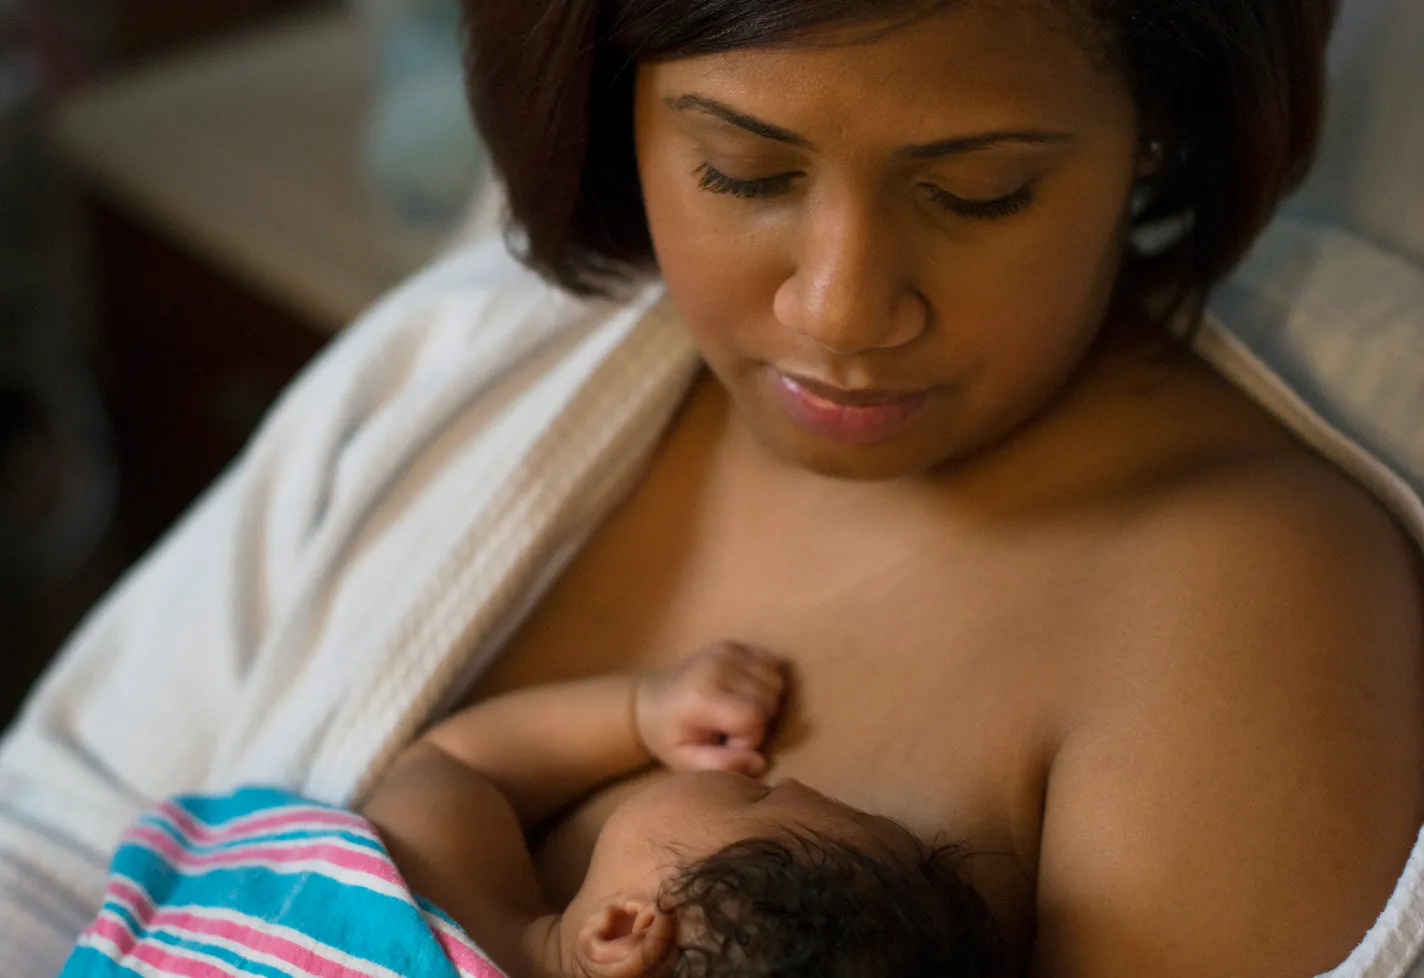 A mother practicing skin-to-skin contact with her newborn.